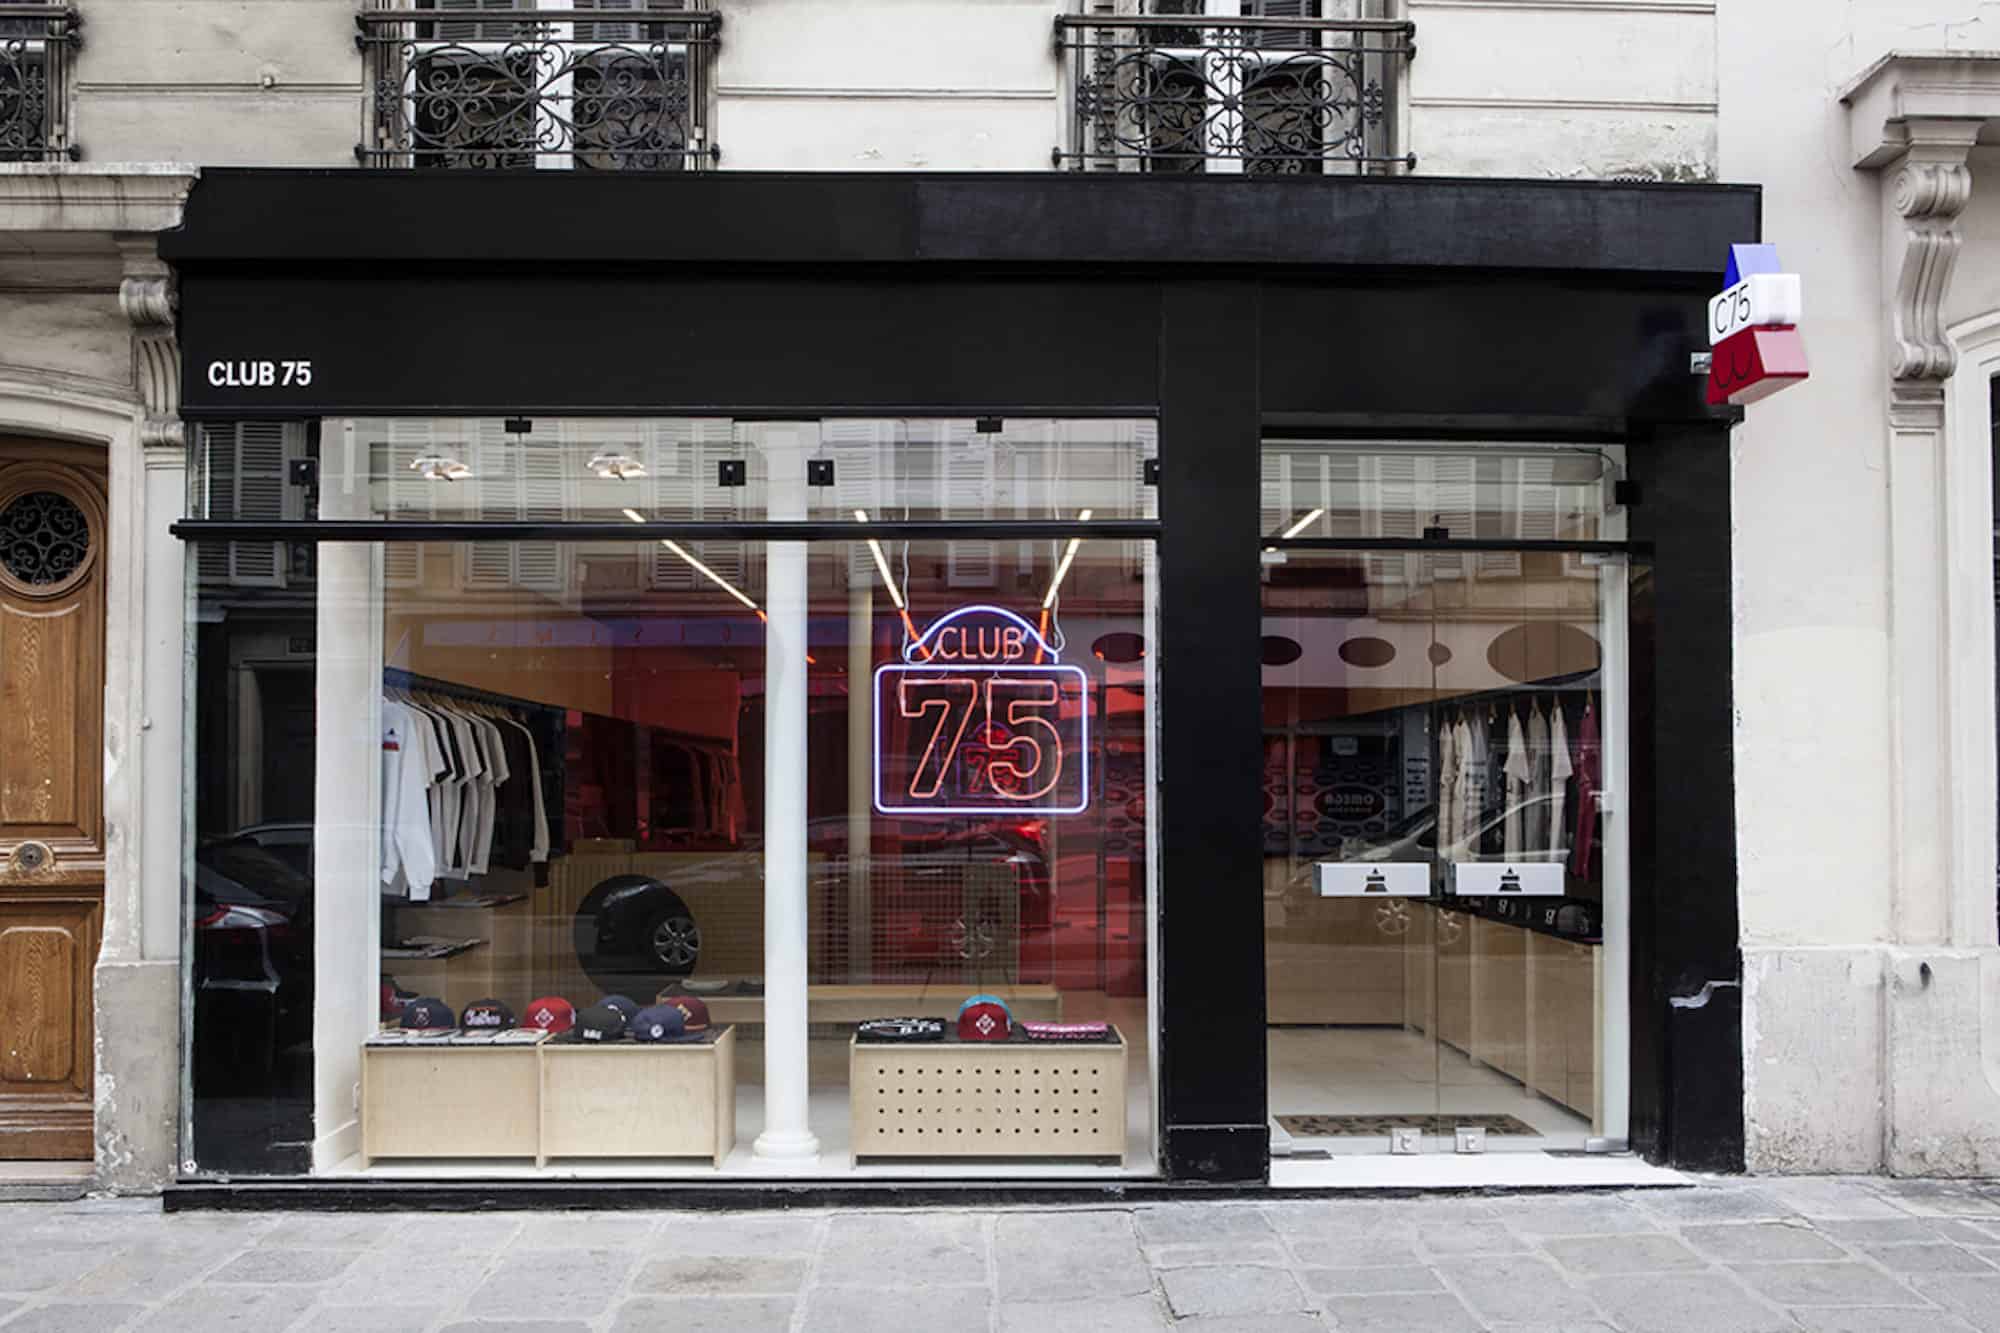 The window of Club 75 with a neon sign of the name of the store in Paris.